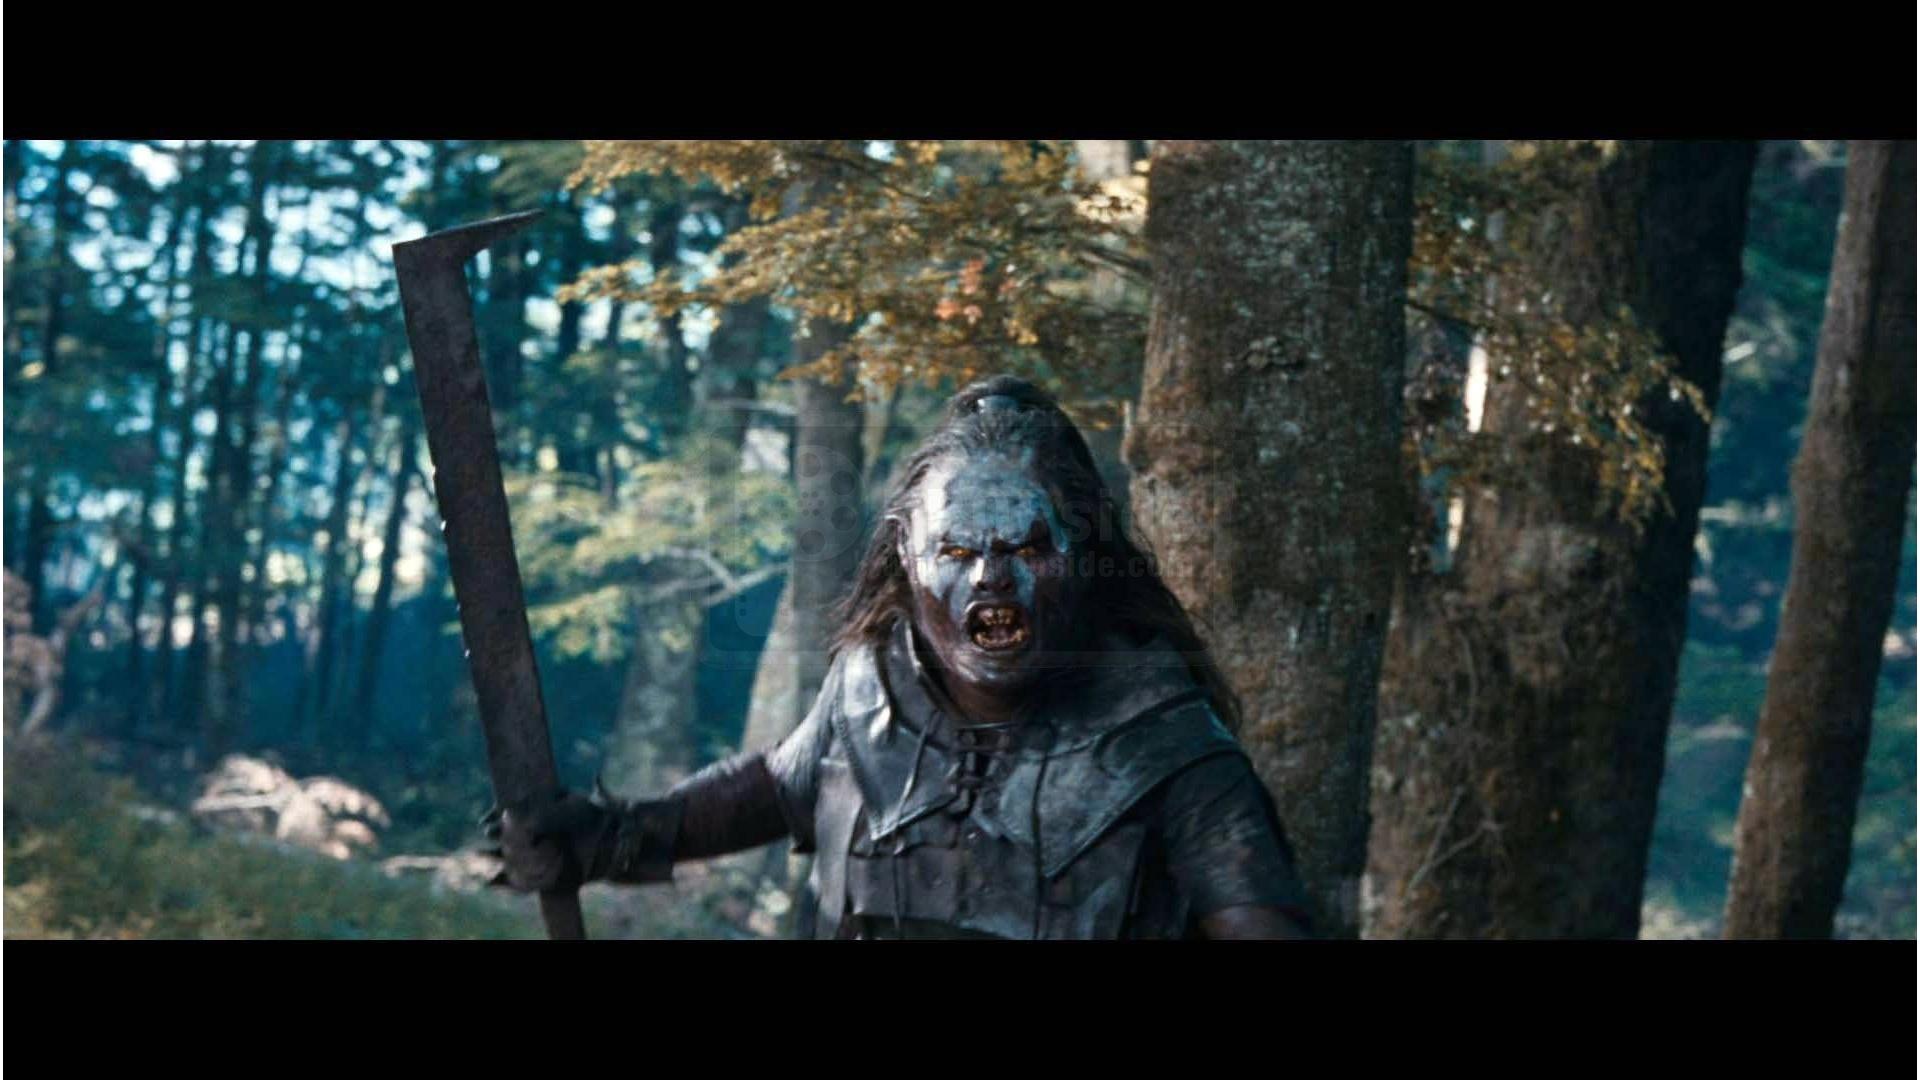 Uruk Hai Sword Lord Of The Rings: The Fellowship Of The Ring